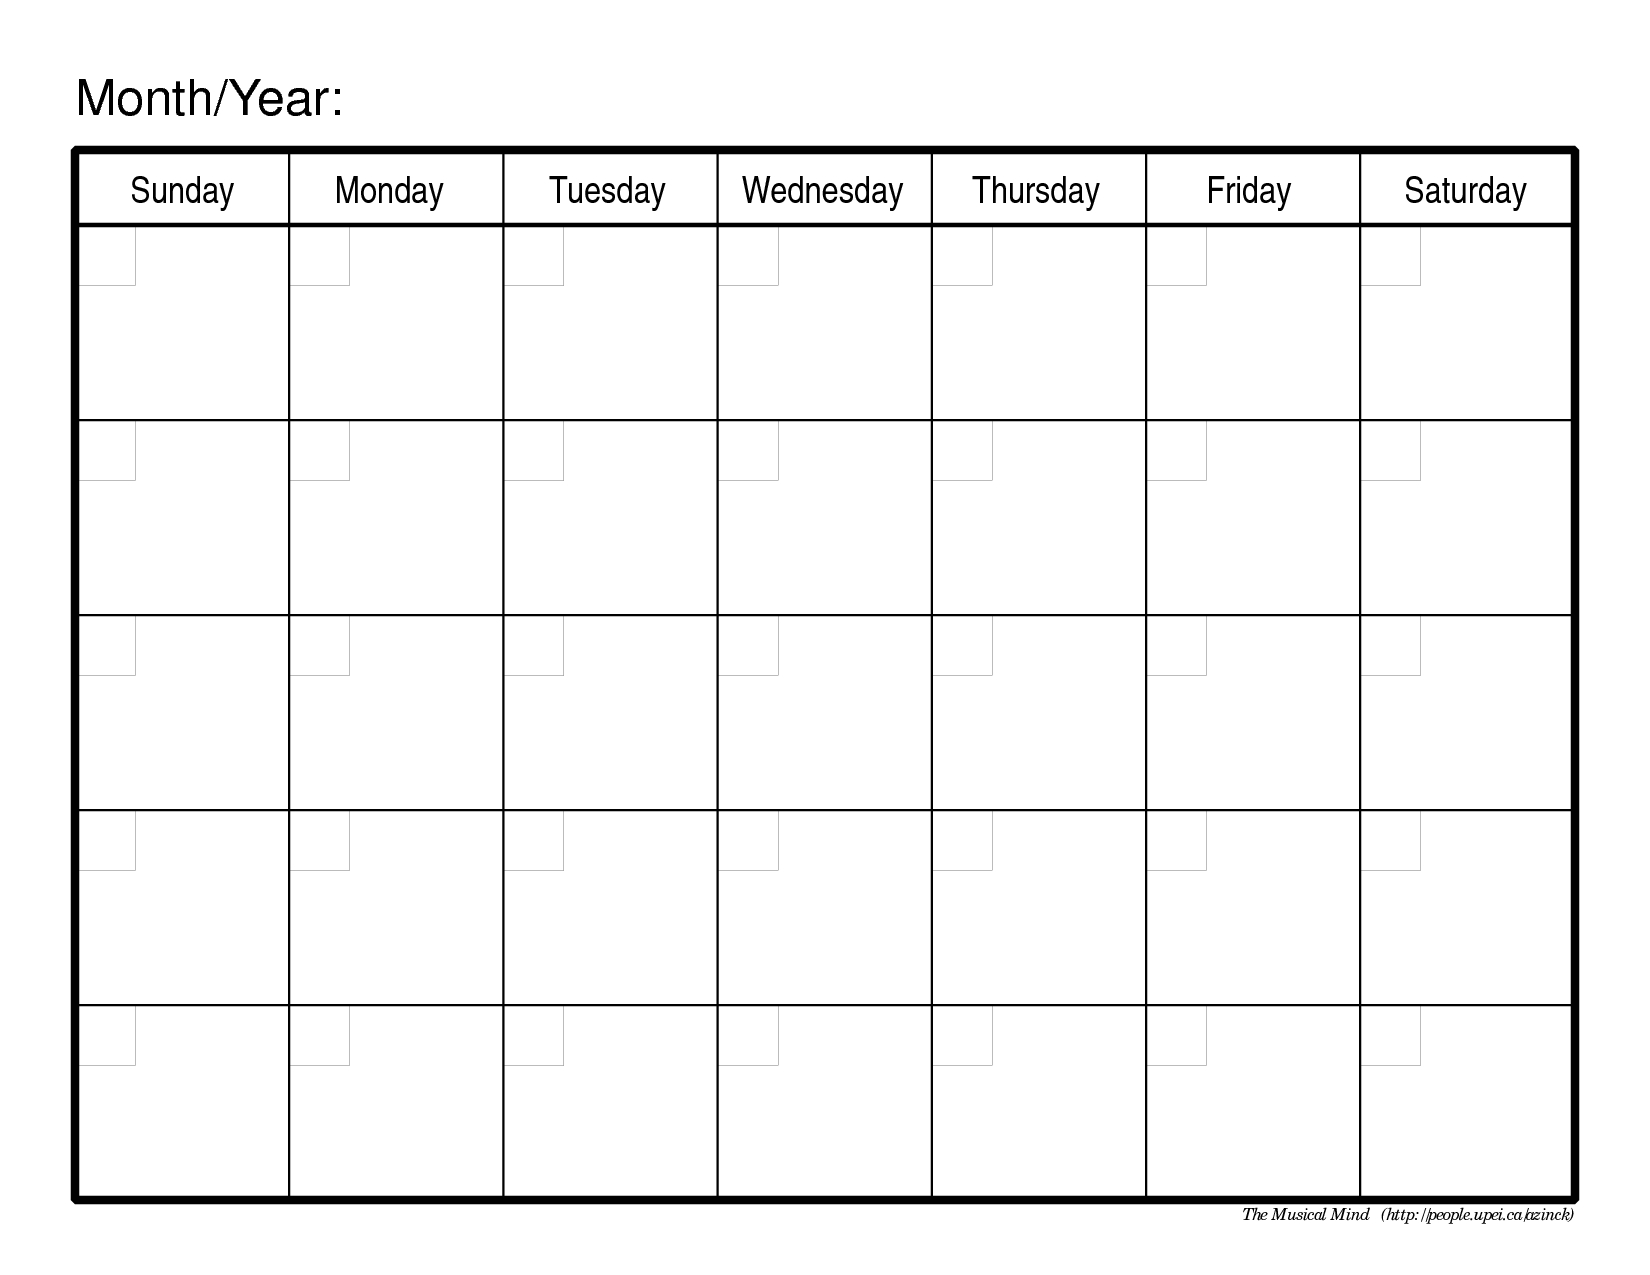 Monthly Calendar Template | Blank Calendar Pages, Free Calendar Template Full Year One Page